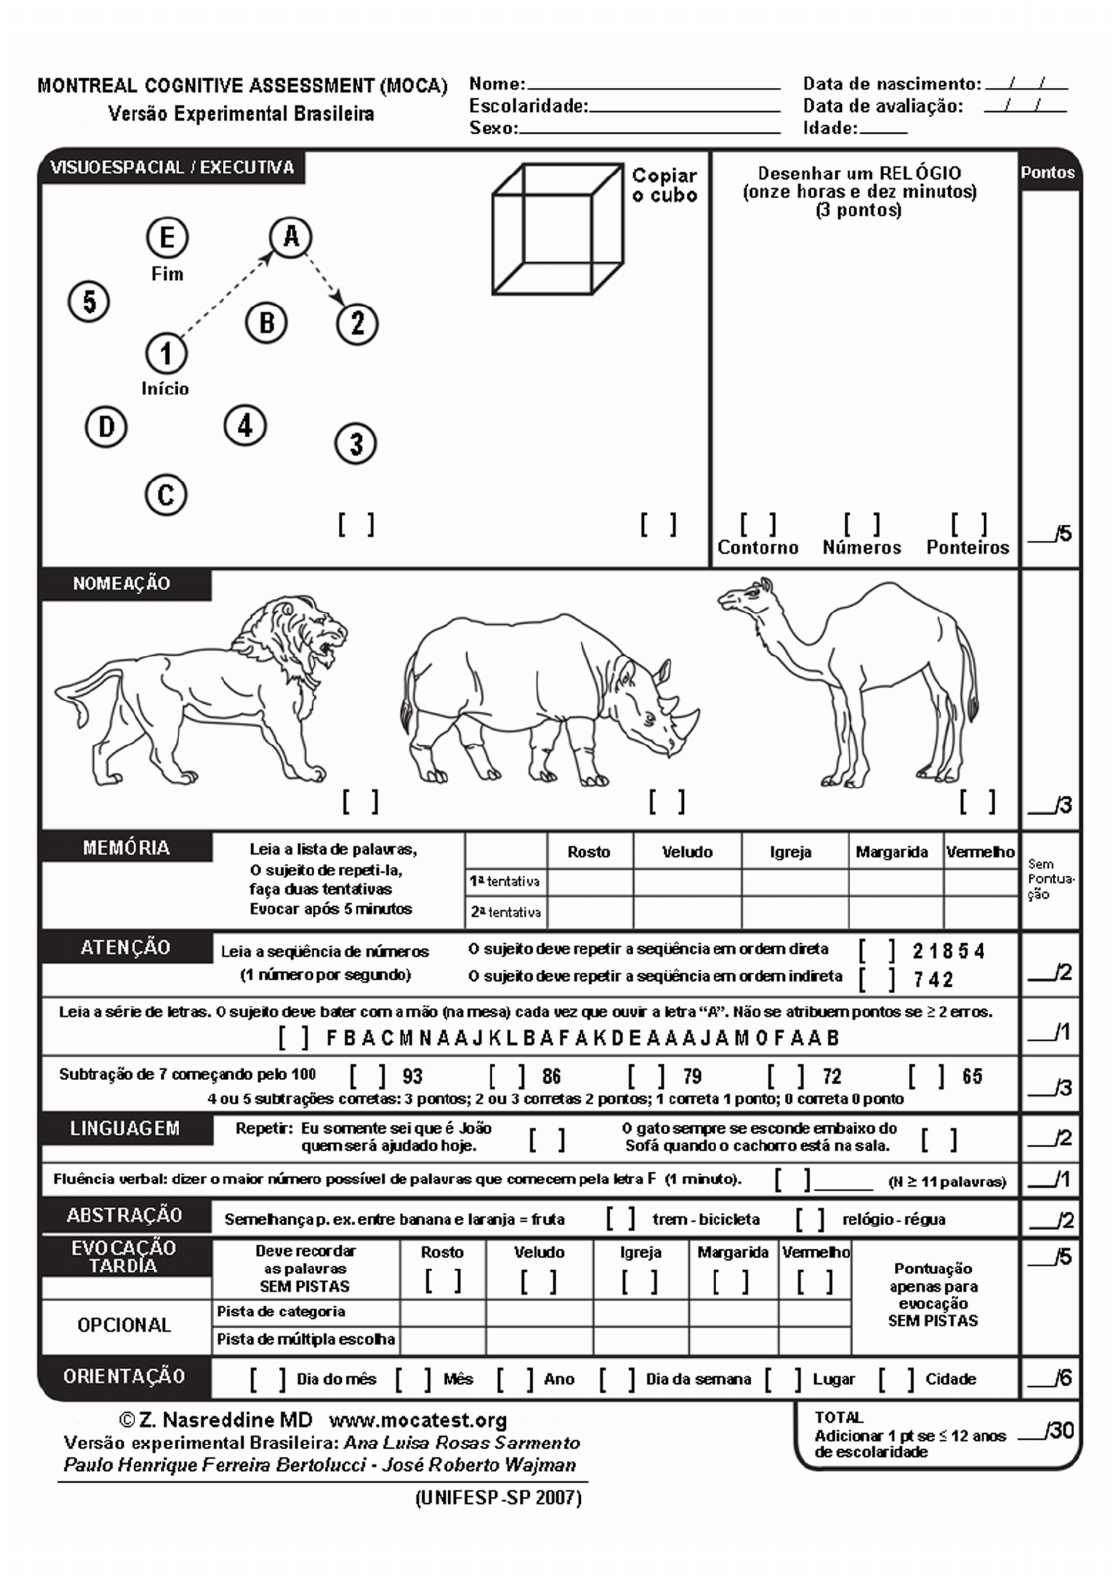 montreal cognitive assessment moca correct answers